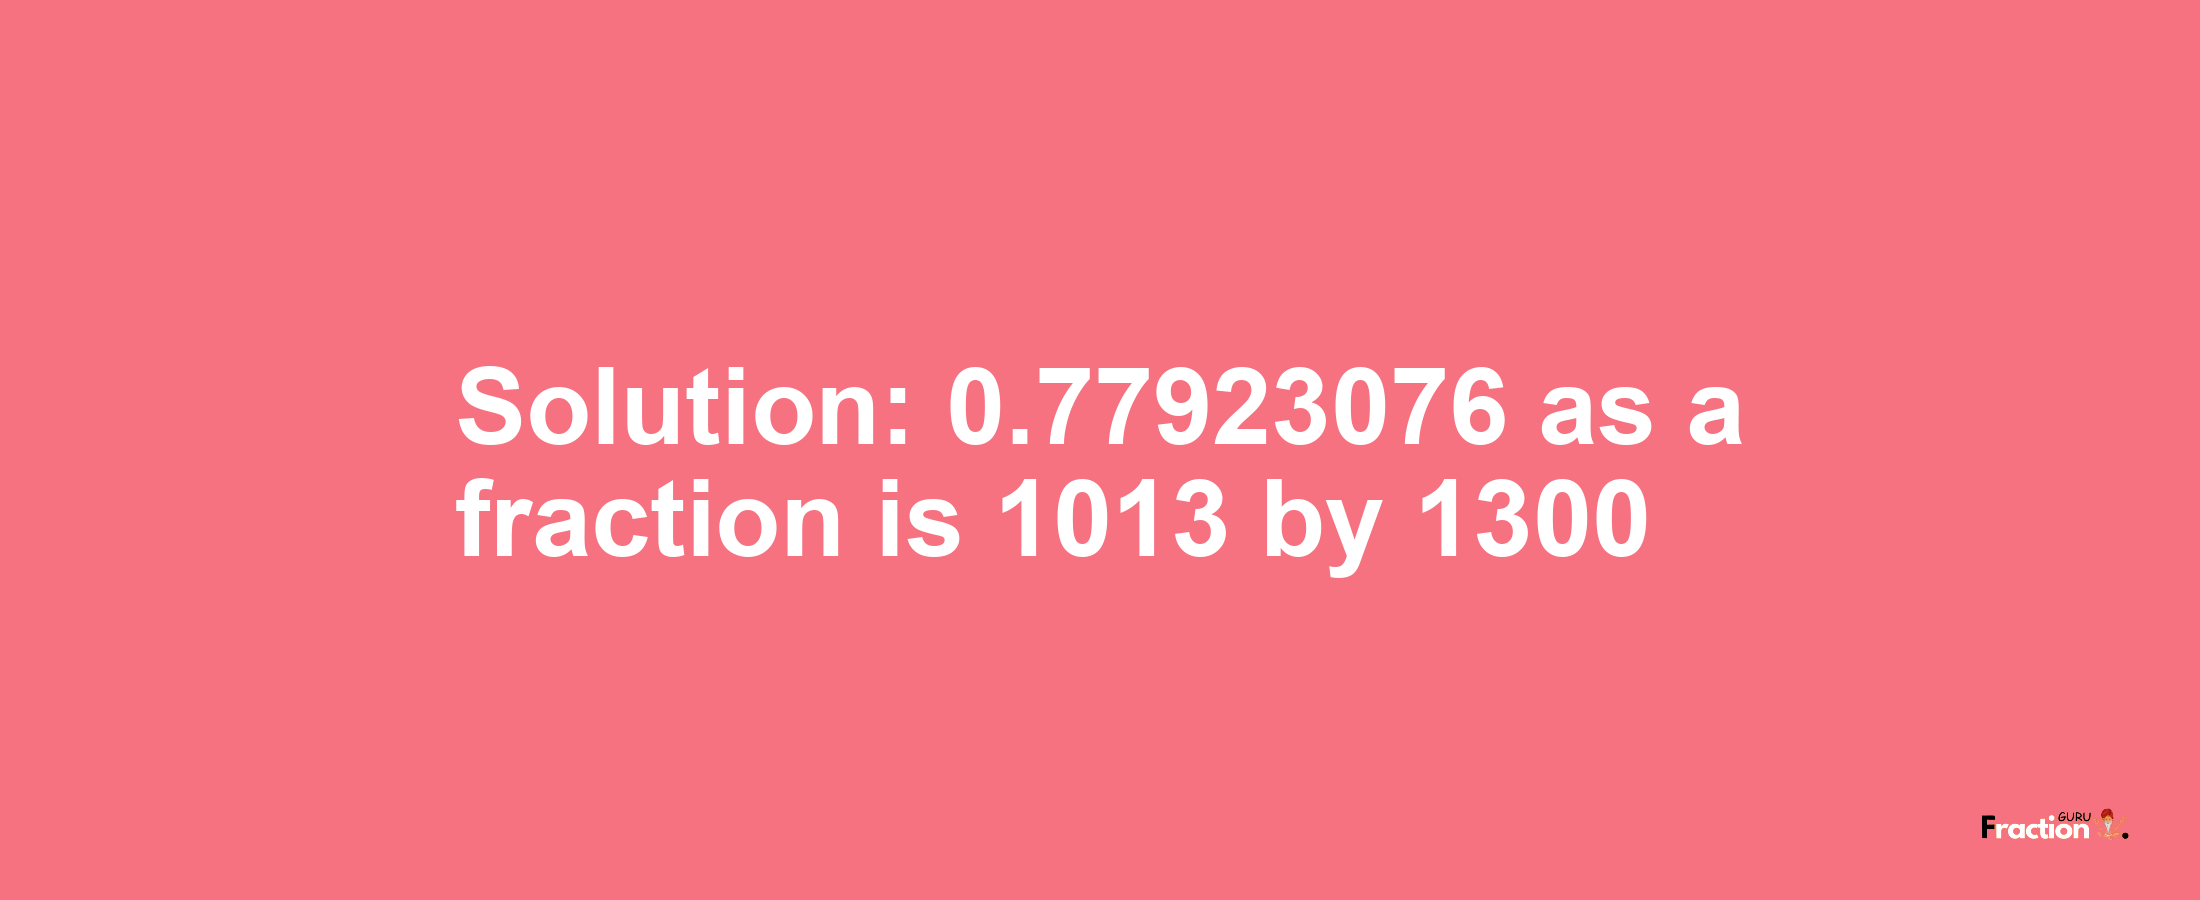 Solution:0.77923076 as a fraction is 1013/1300